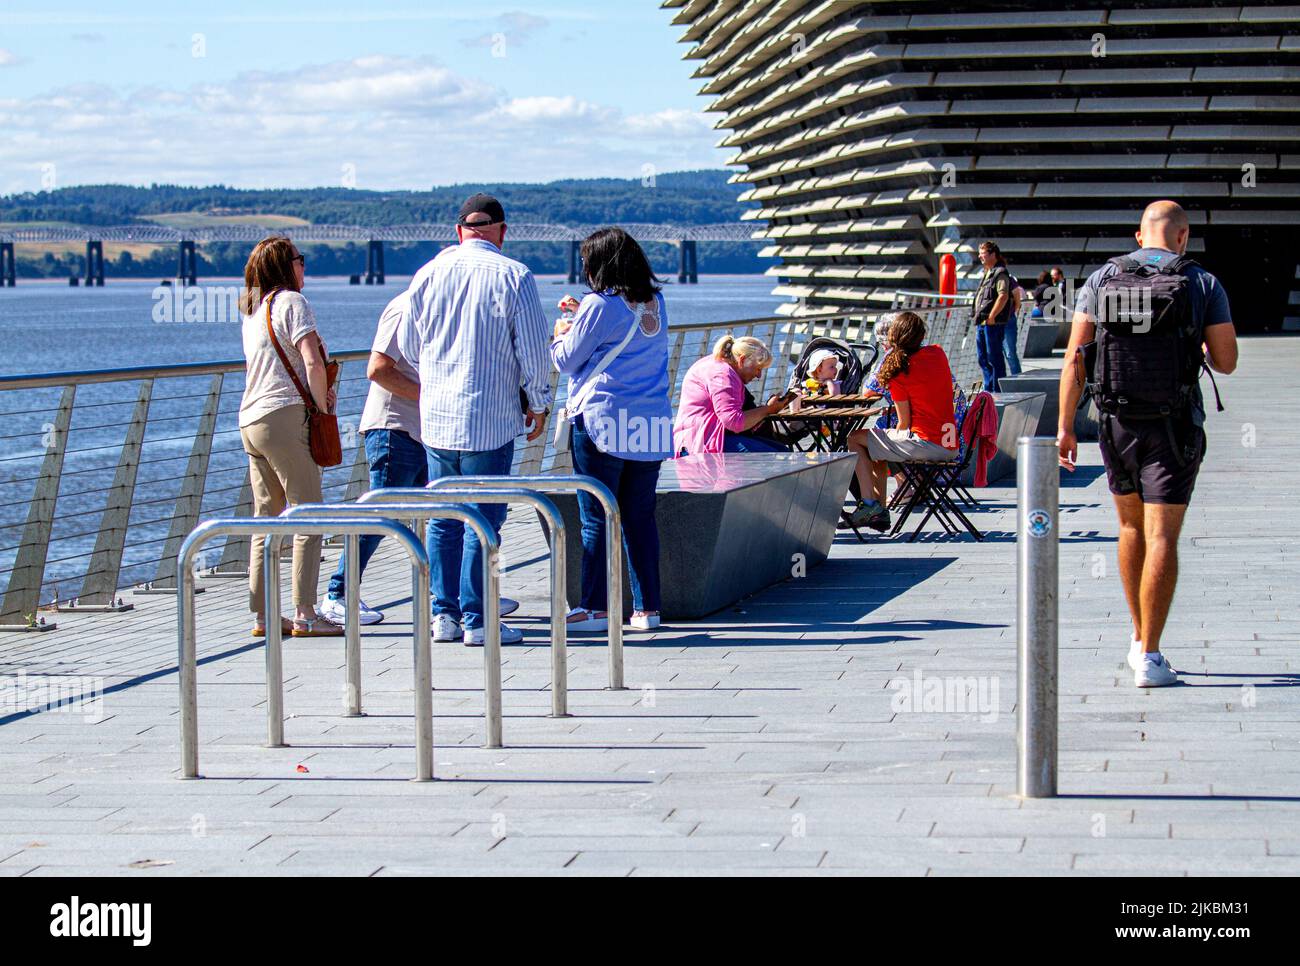 Dundee, Tayside, Scotland, UK. 1st Aug, 2022. UK Weather: Temperatures in North East Scotland have reached 20°C, begins the August heatwave. Tourists and local residents are out and about sightseeing while enjoying the beautiful weather and buying ice cream cones, cold drinks, and coffees outside the V&A Design Museum at the Heather Street Food vendors along Dundee`s Waterfront Development Project. Credit: Dundee Photographics/Alamy Live News Stock Photo